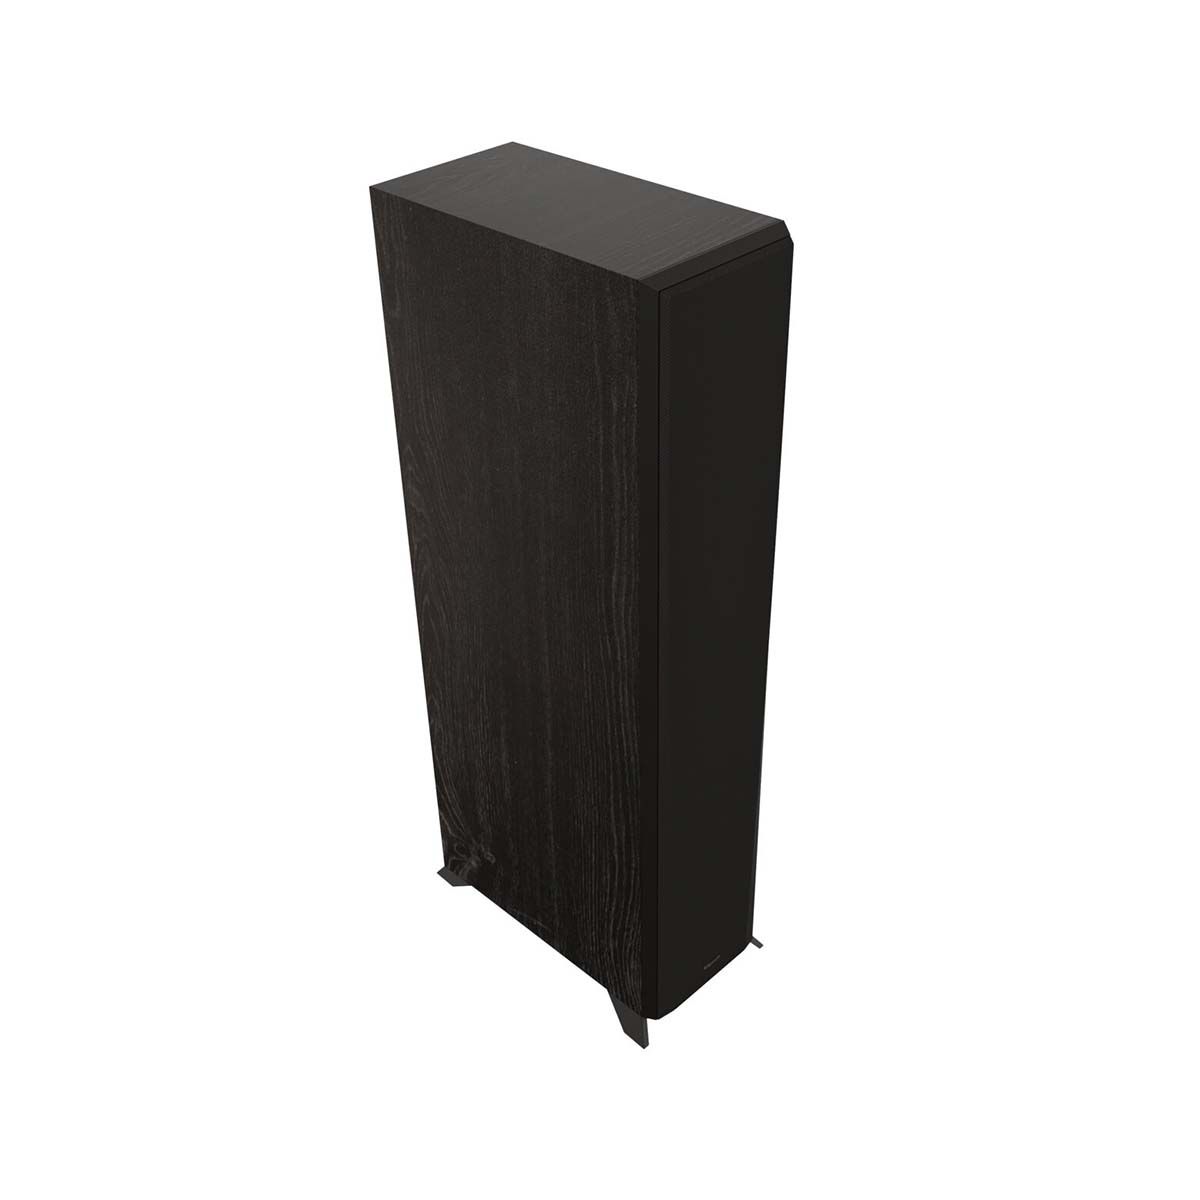 Klipsch RP-6000F II Floorstanding Speaker - Ebony - angled front view with grill